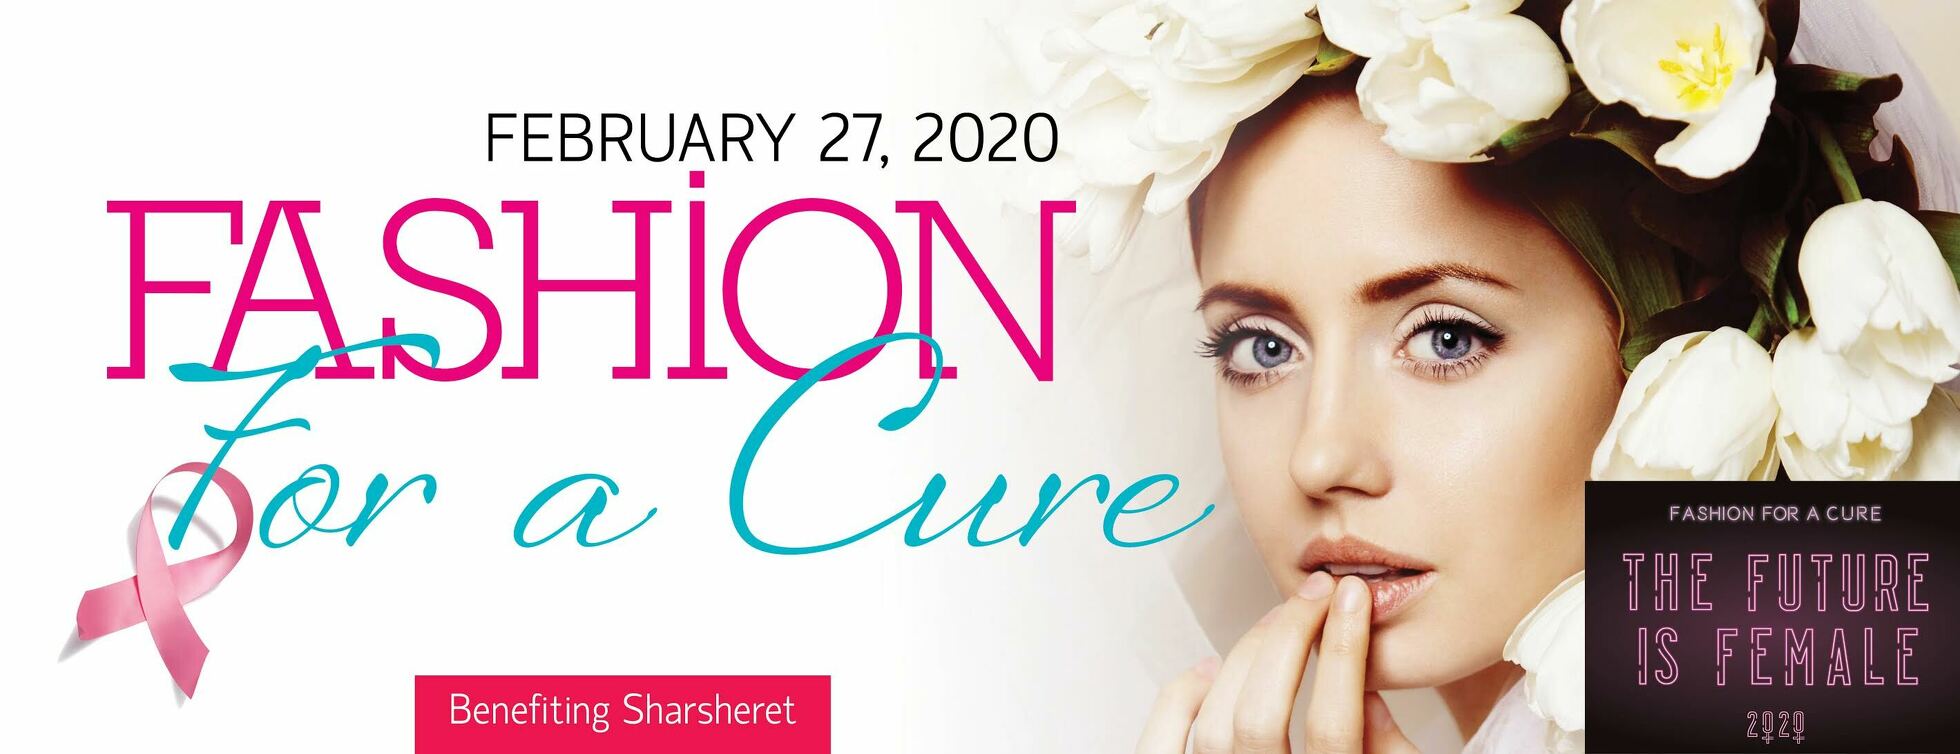 Fashion for a Cure 2020